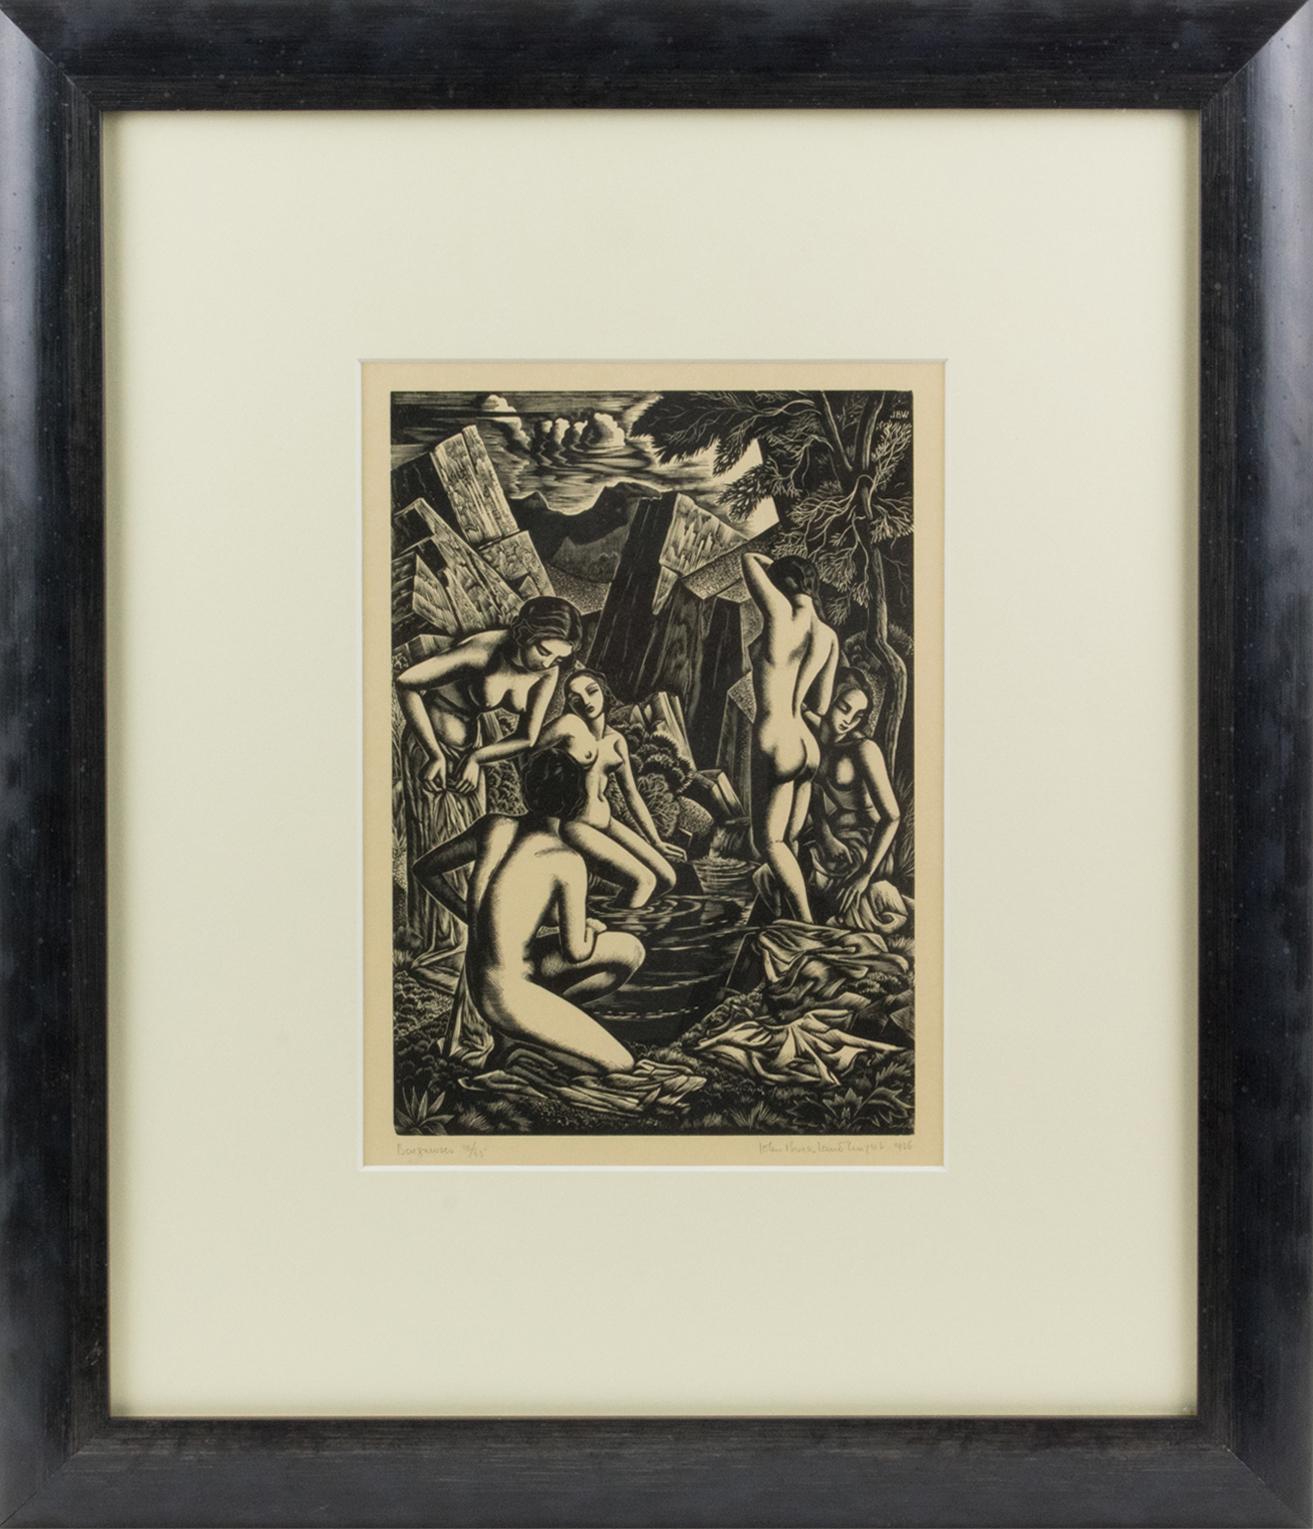 This elegant wood-engraving charcoal drawing lithograph print was designed by John Buckland-Wright (1897-1954). The piece is signed, dated, titled, and numbered in pencil on the margin. The drawing has a signature inside the scene with a